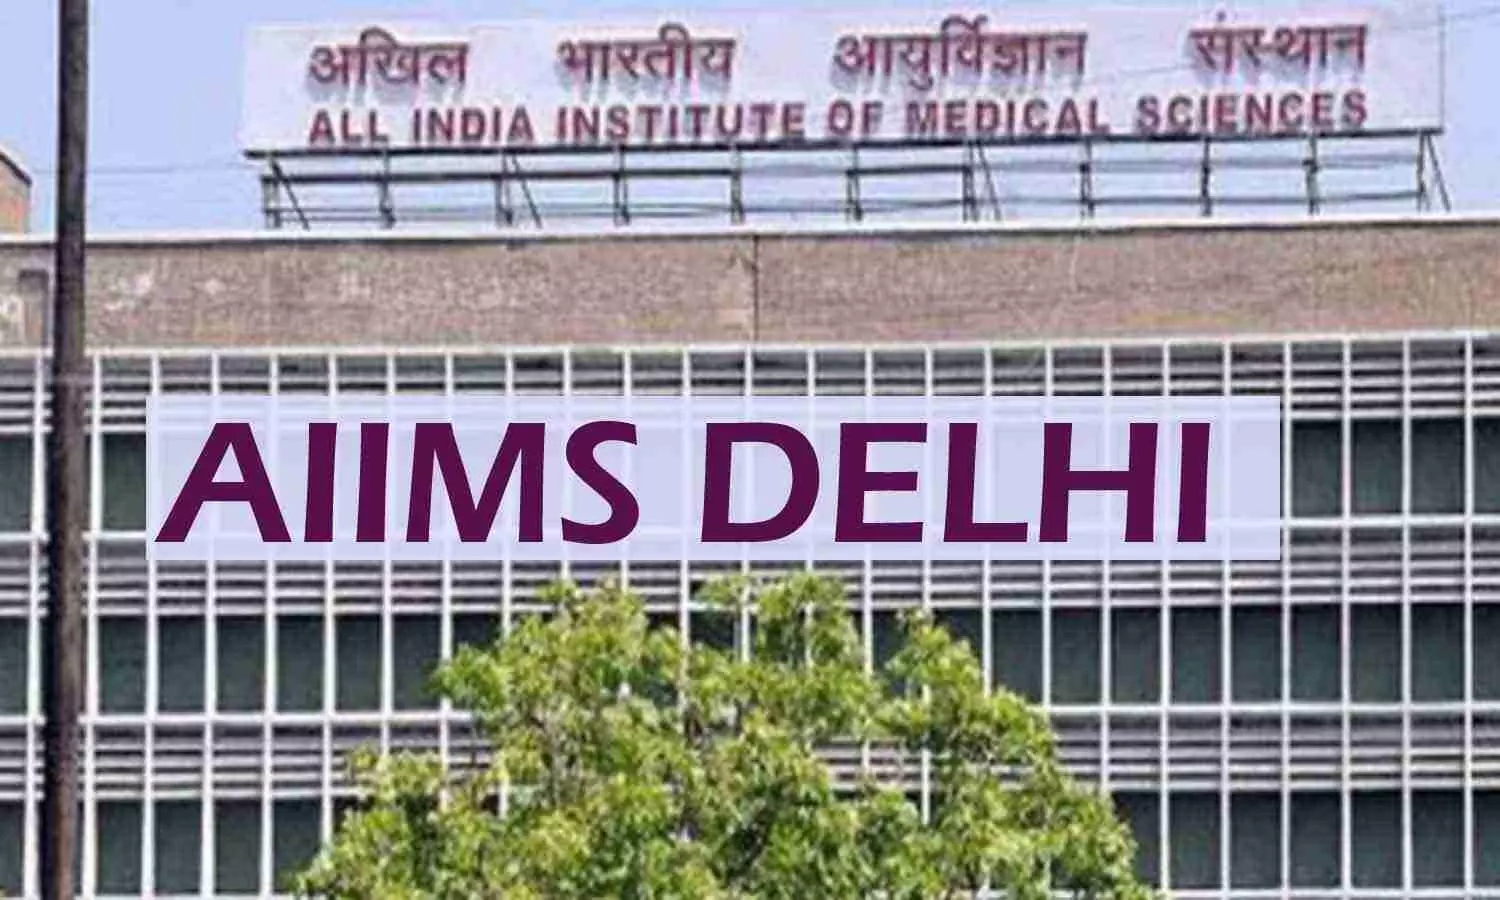 Arrested: Man impersonates AIIMS doctor, duped Female doctors with Promise of PG medical seats